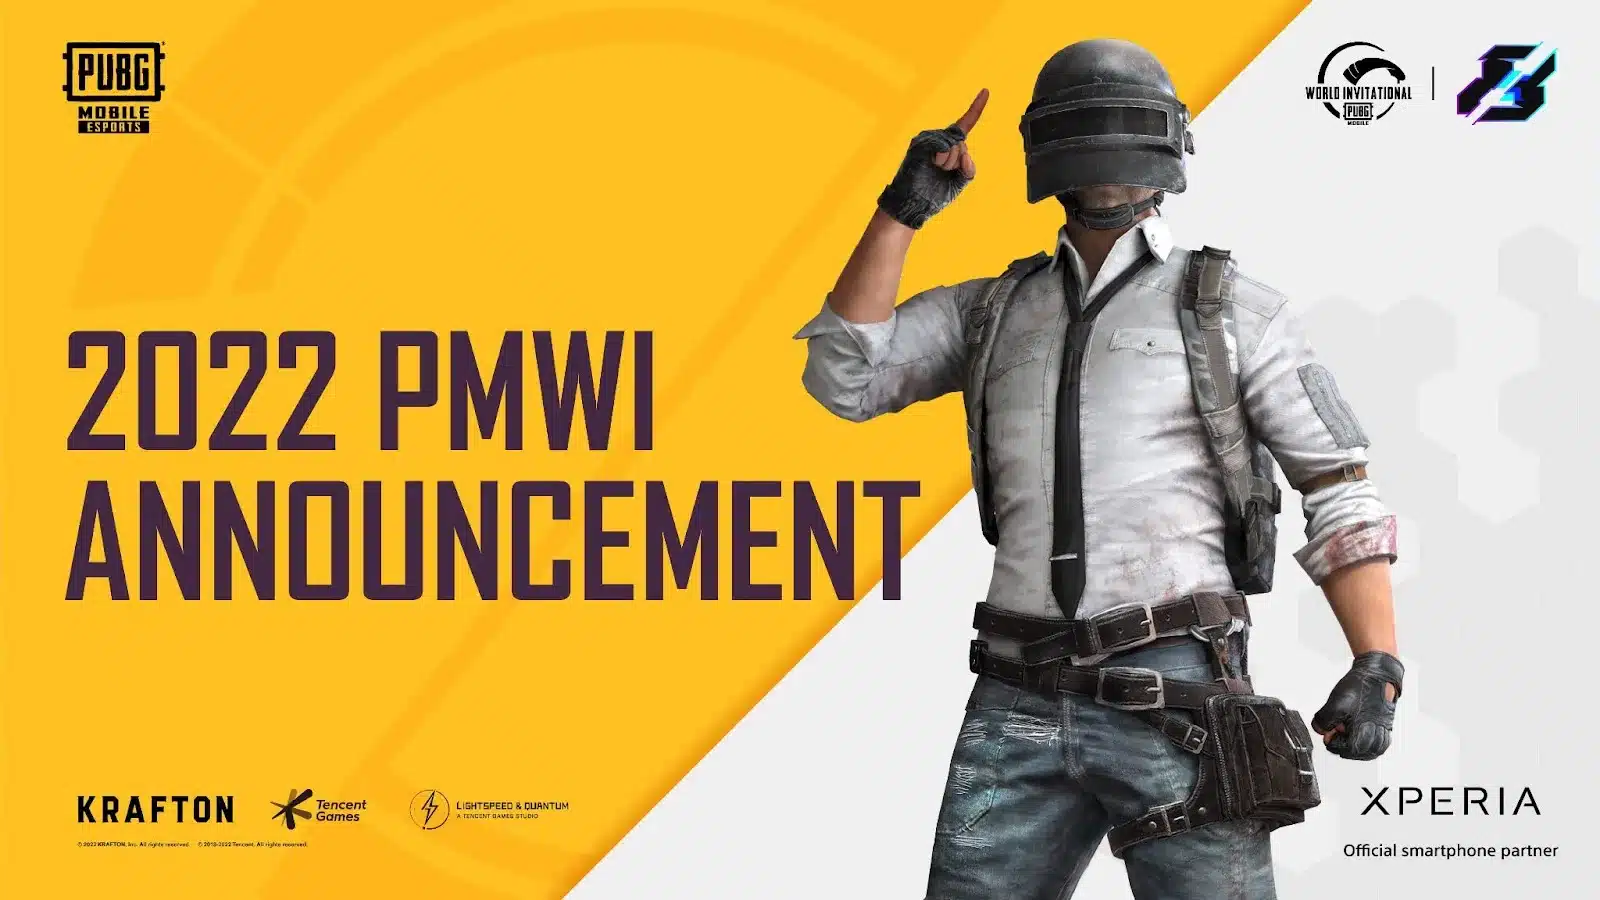 PUBG MOBILE has today revealed the second edition of the PUBG MOBILE World Invitational, GamersRD